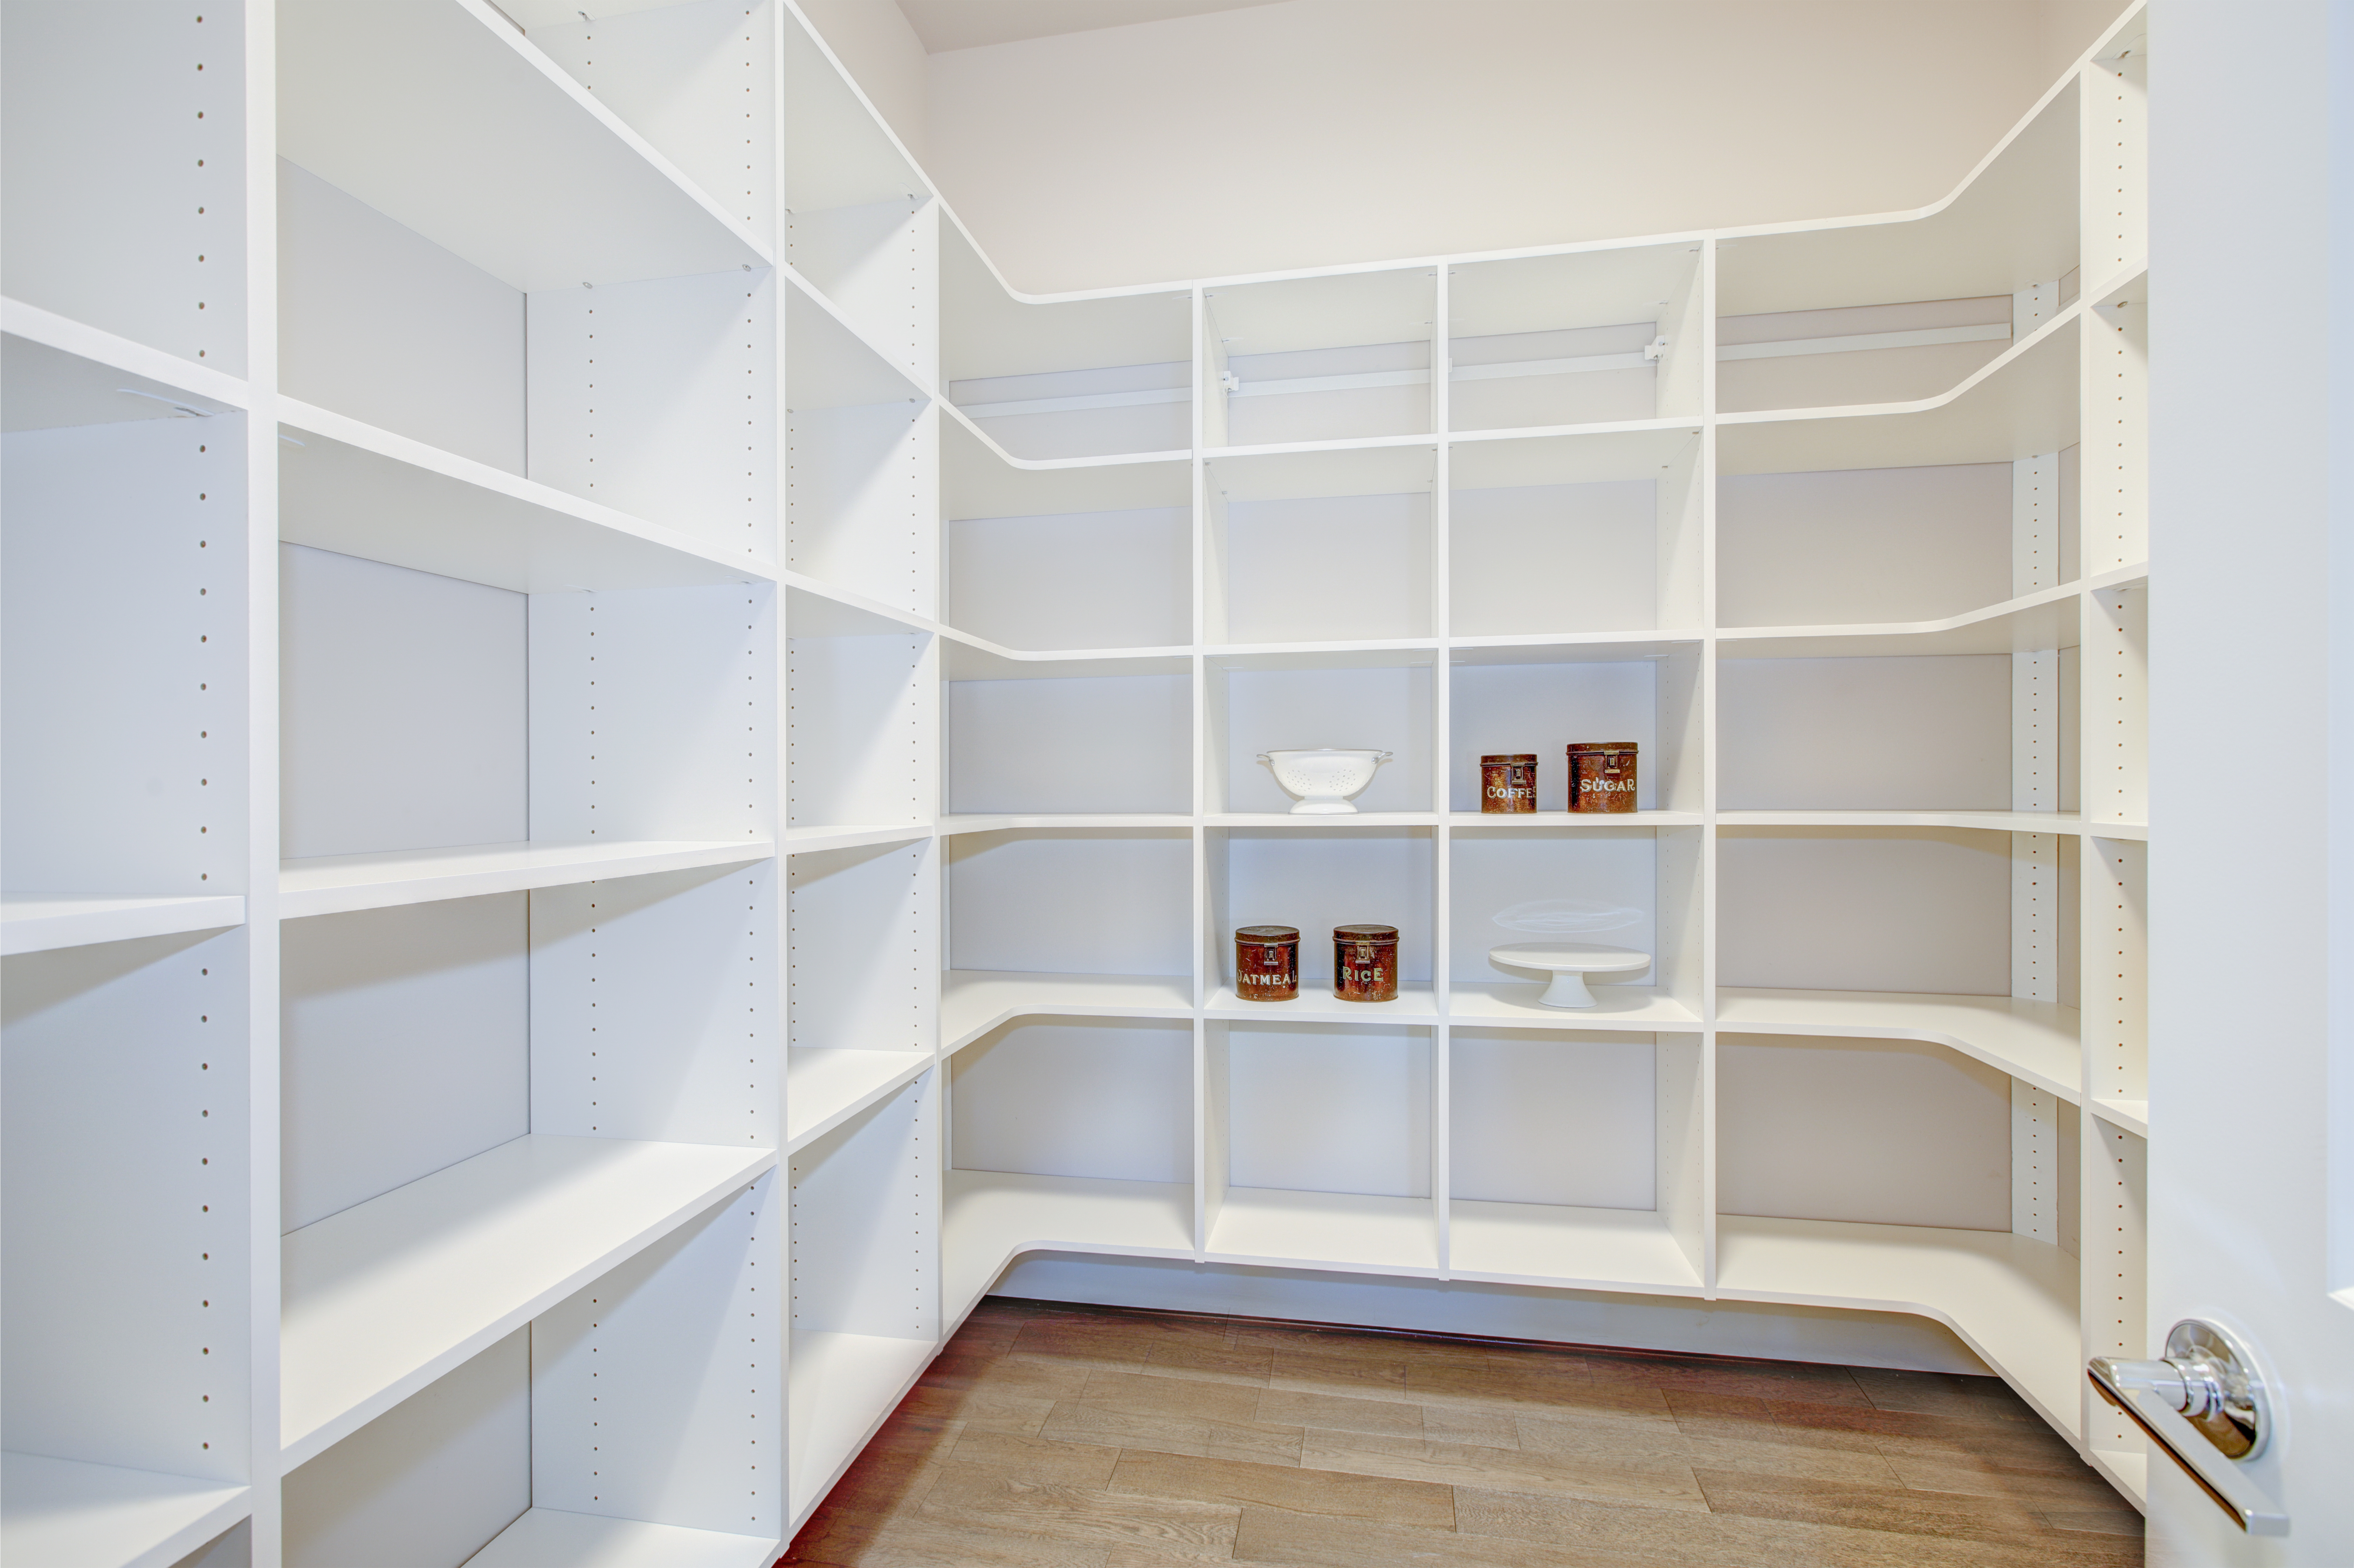 How to Design the Perfect Walk-in Pantry for Your Kitchen - Featured Image